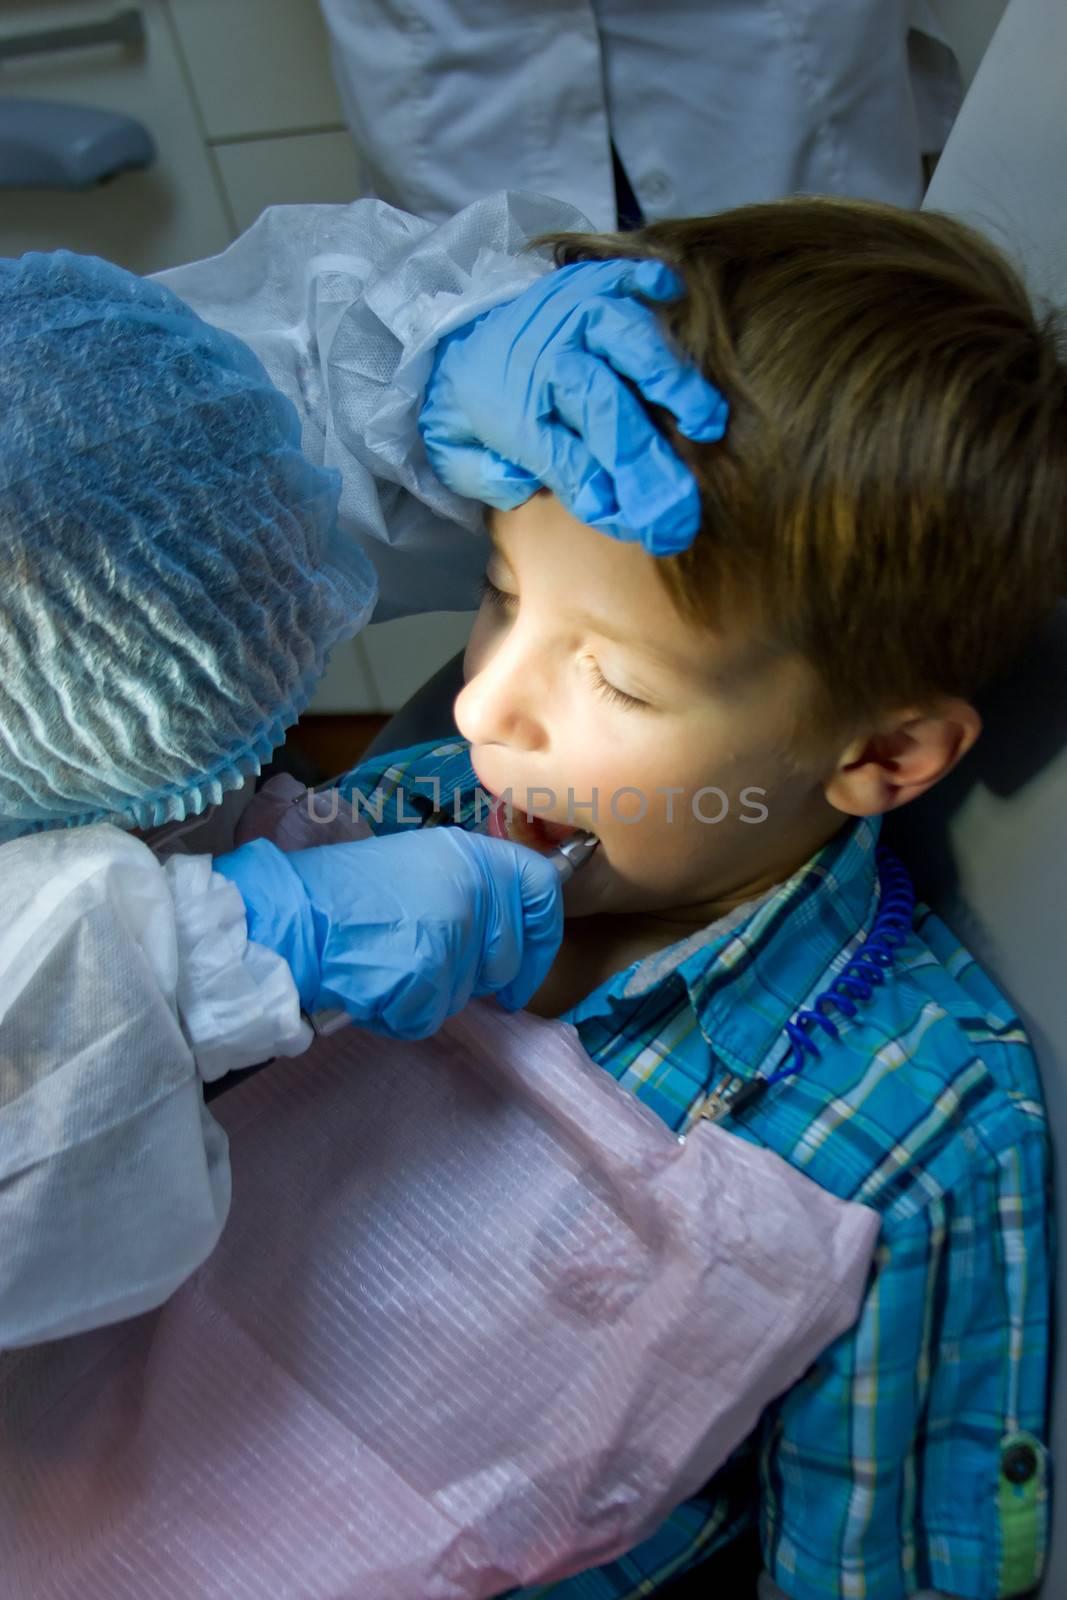 A couple of kids playing doctor at the dentist